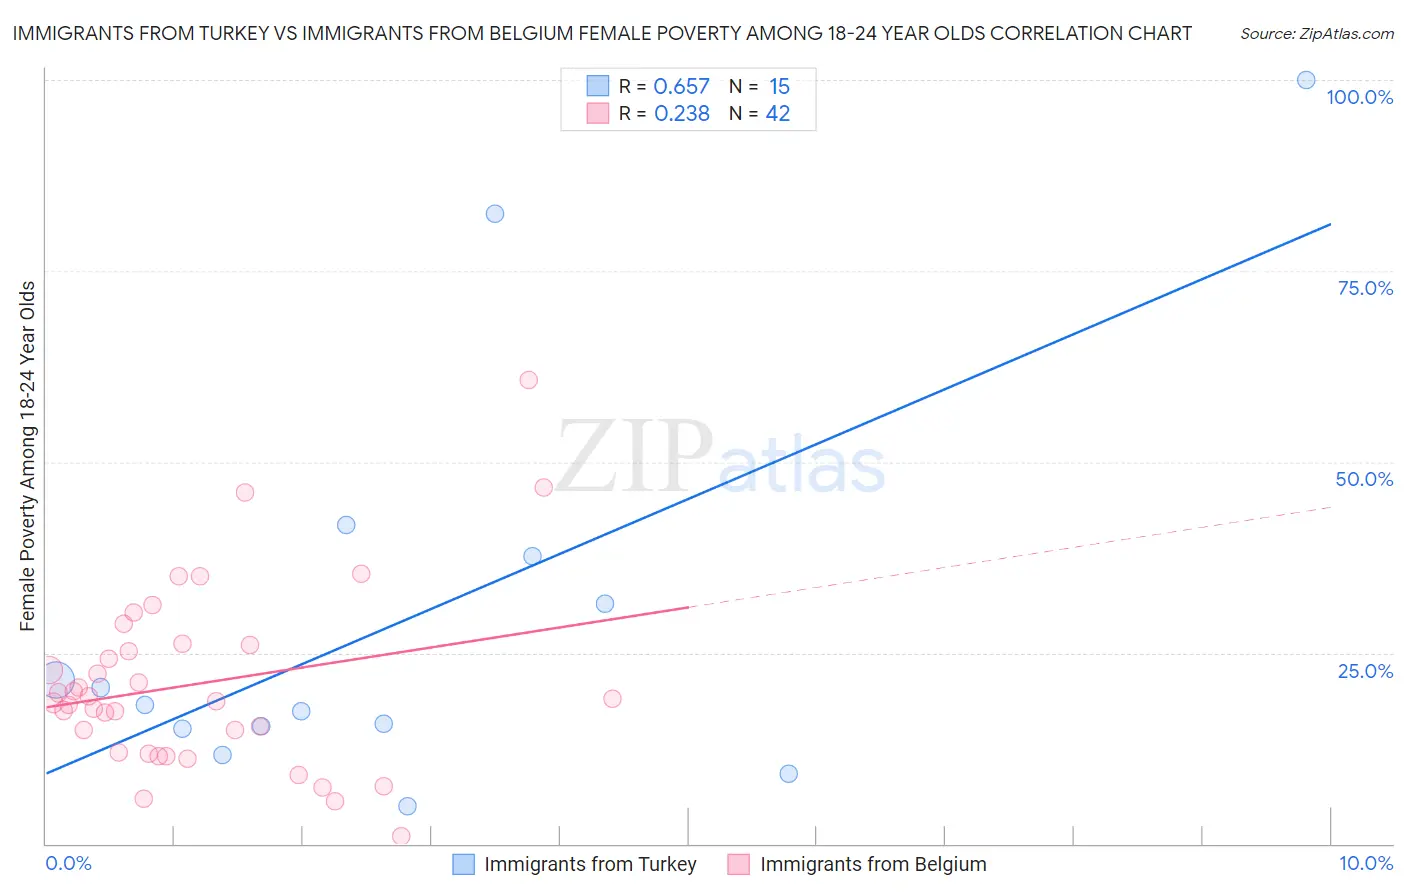 Immigrants from Turkey vs Immigrants from Belgium Female Poverty Among 18-24 Year Olds